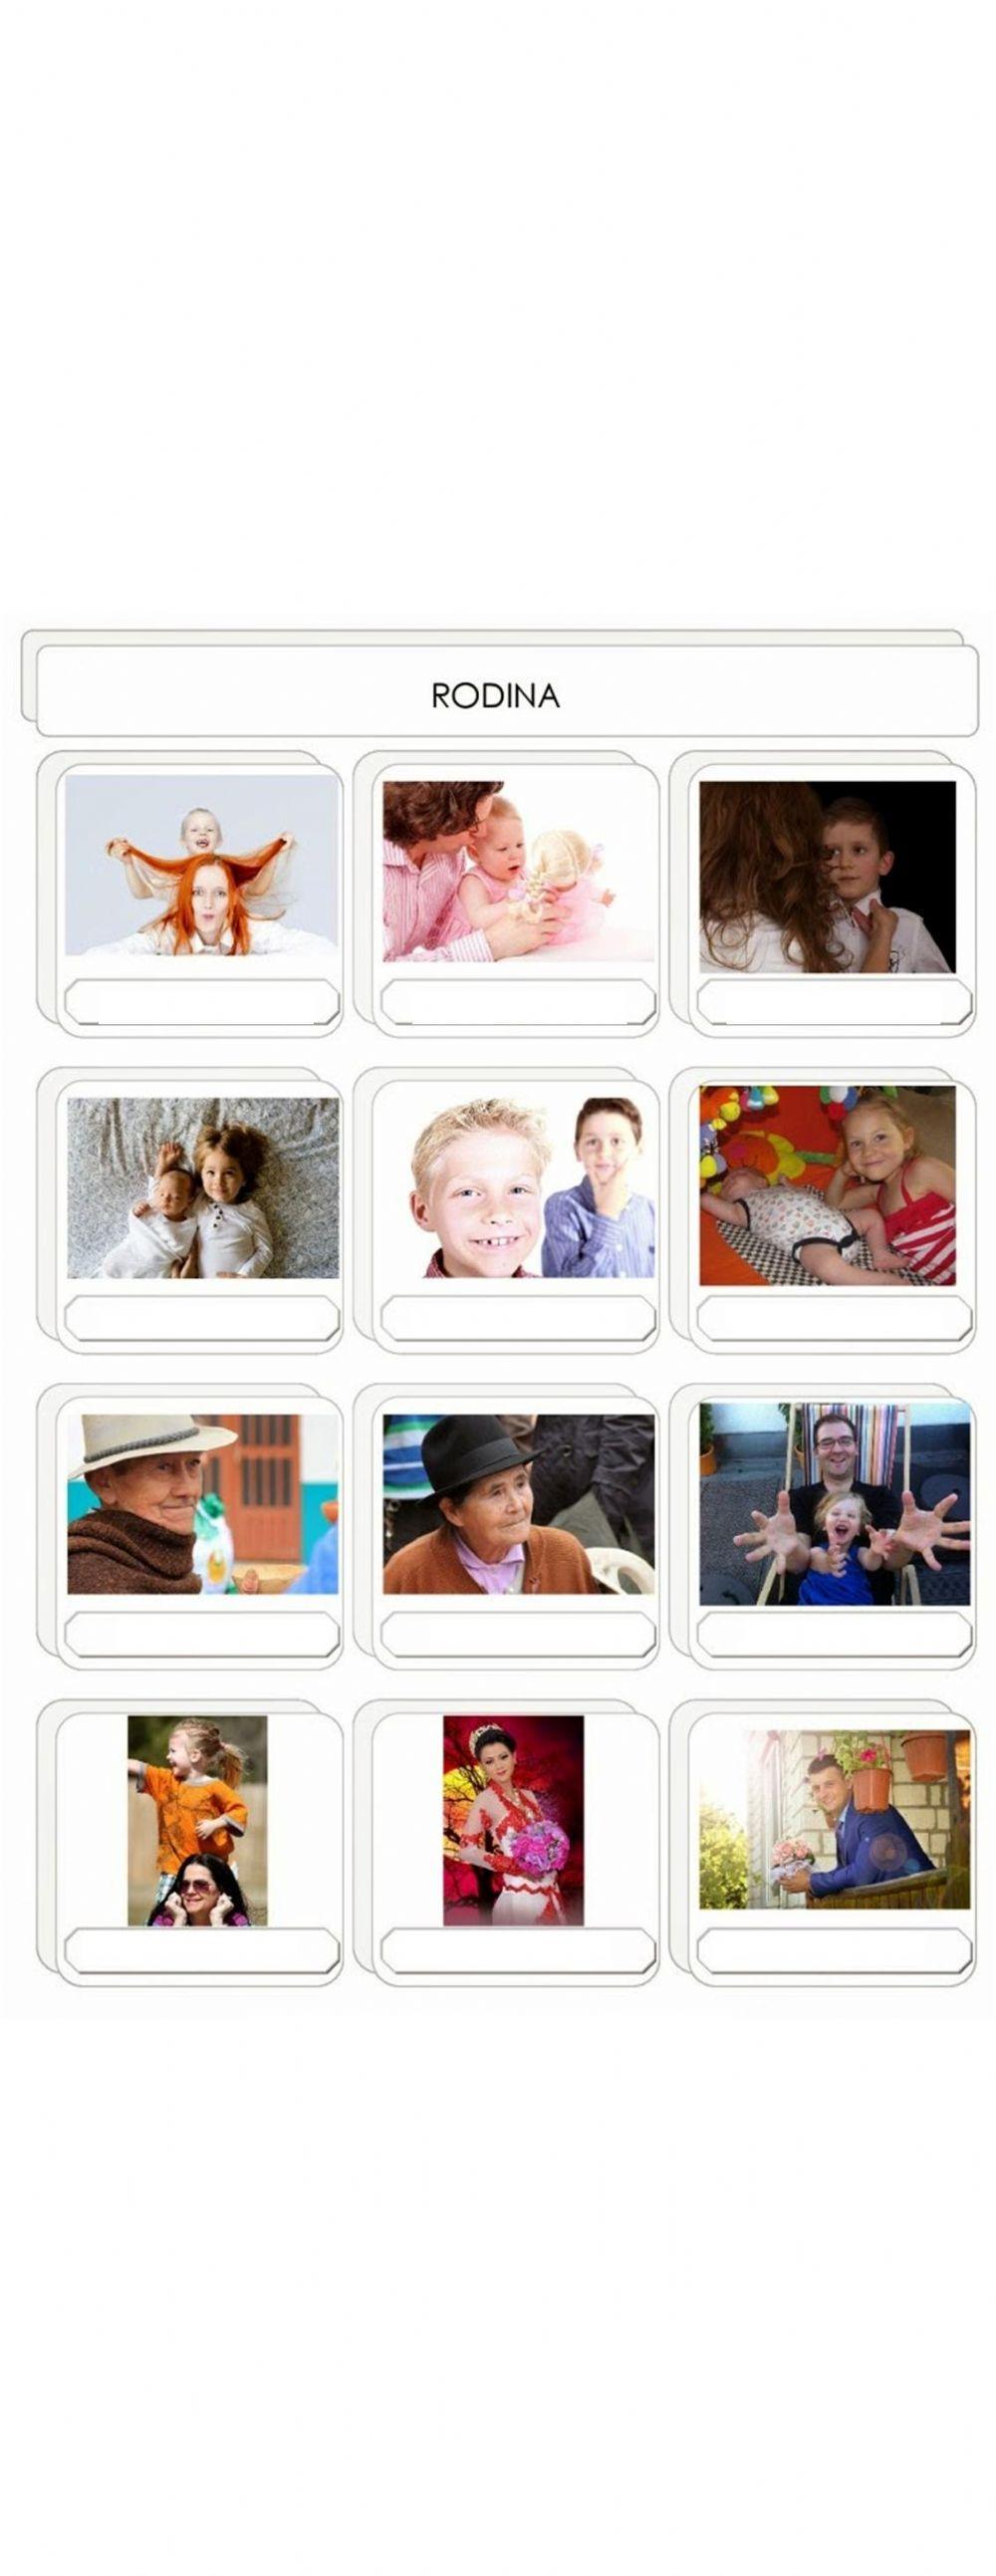 Rodina (Czech Vocabulary online exercises: Family - video and an interactive game)